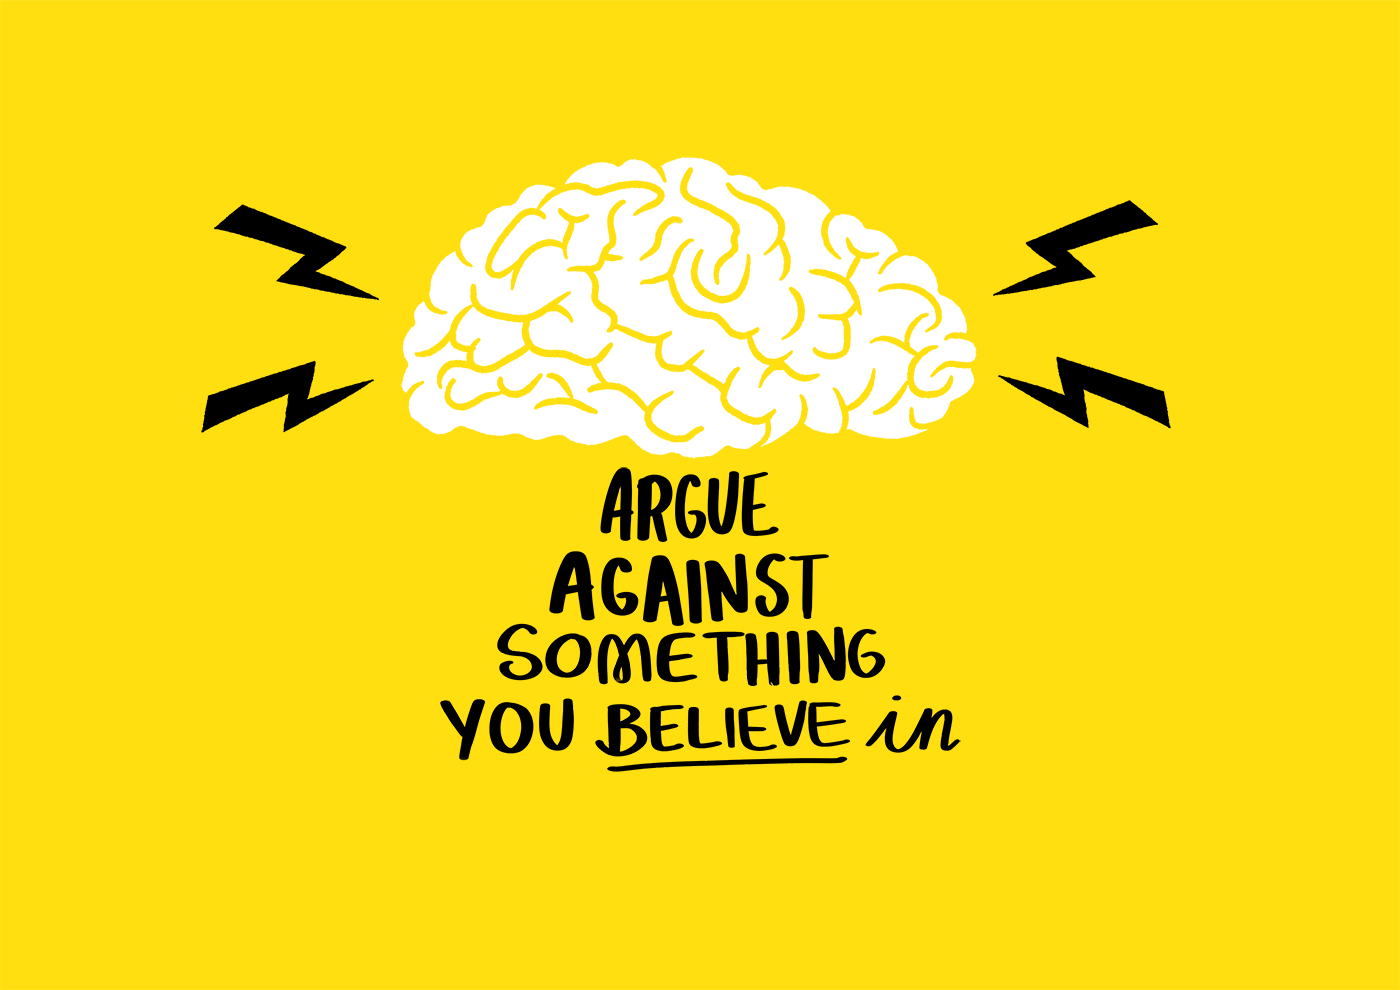 Argue against something you believe in